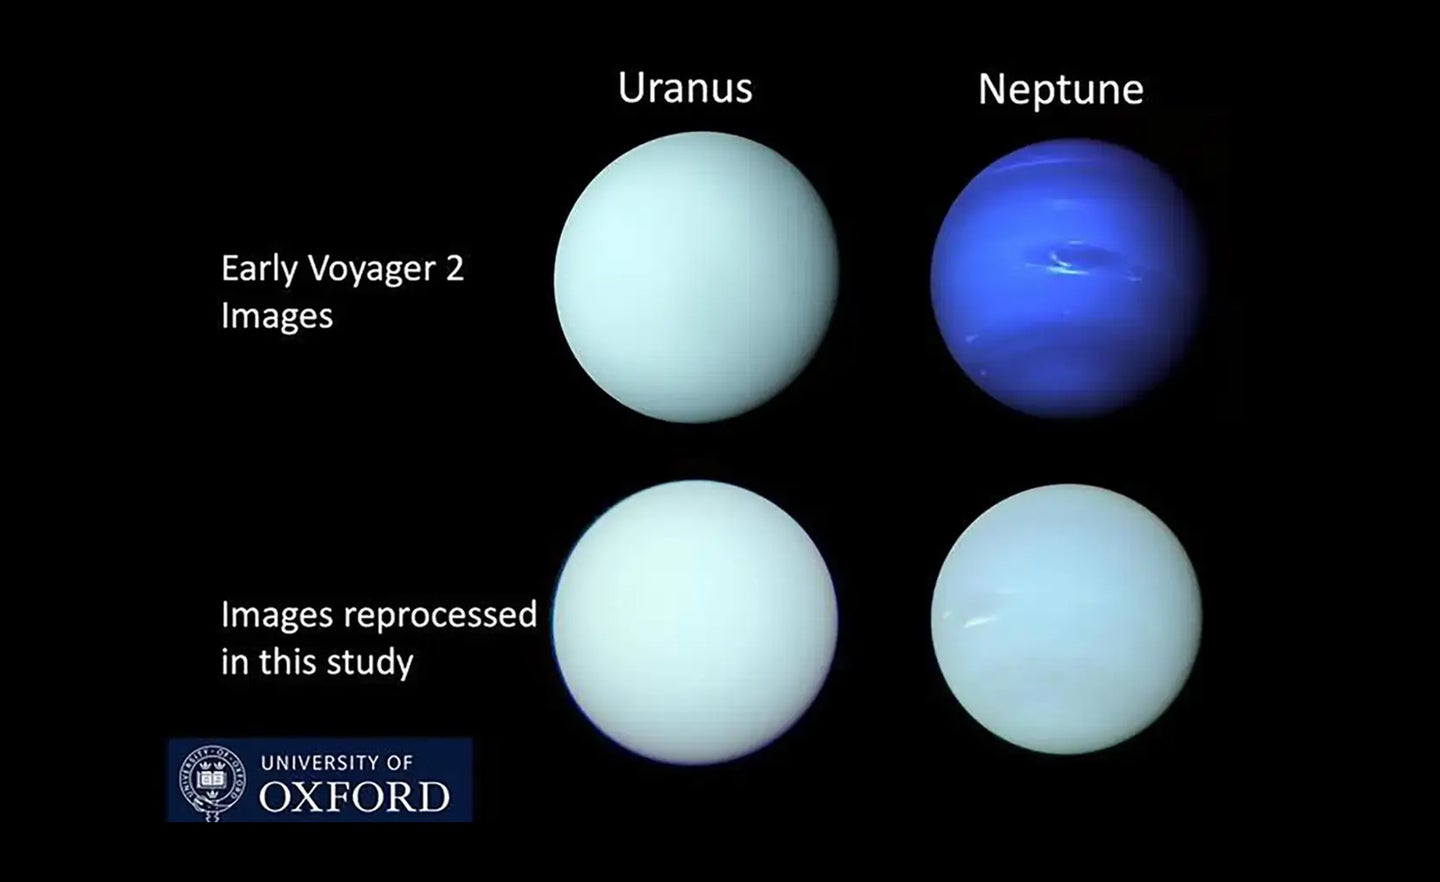 Voyager 2/ISS images of Uranus and Neptune released shortly after the Voyager 2 flybys in 1986 and 1989, respectively, compared with a reprocessing of the individual filter images in this study to determine the best estimate of the true colors of these planets.